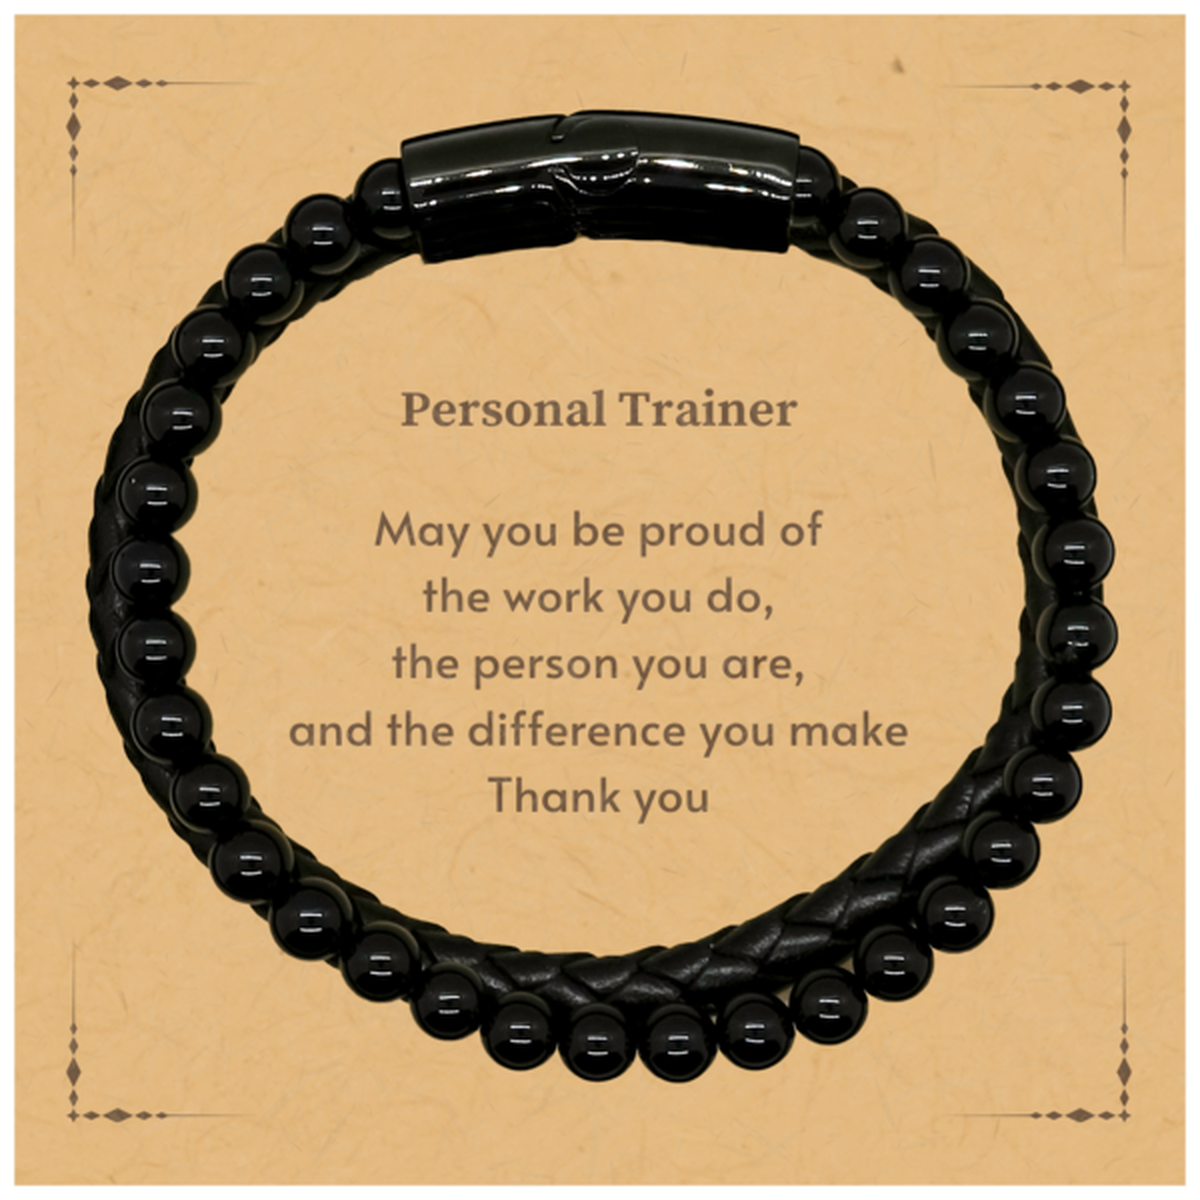 Heartwarming Stone Leather Bracelets Retirement Coworkers Gifts for Personal Trainer, Personal Trainer May You be proud of the work you do, the person you are Gifts for Boss Men Women Friends